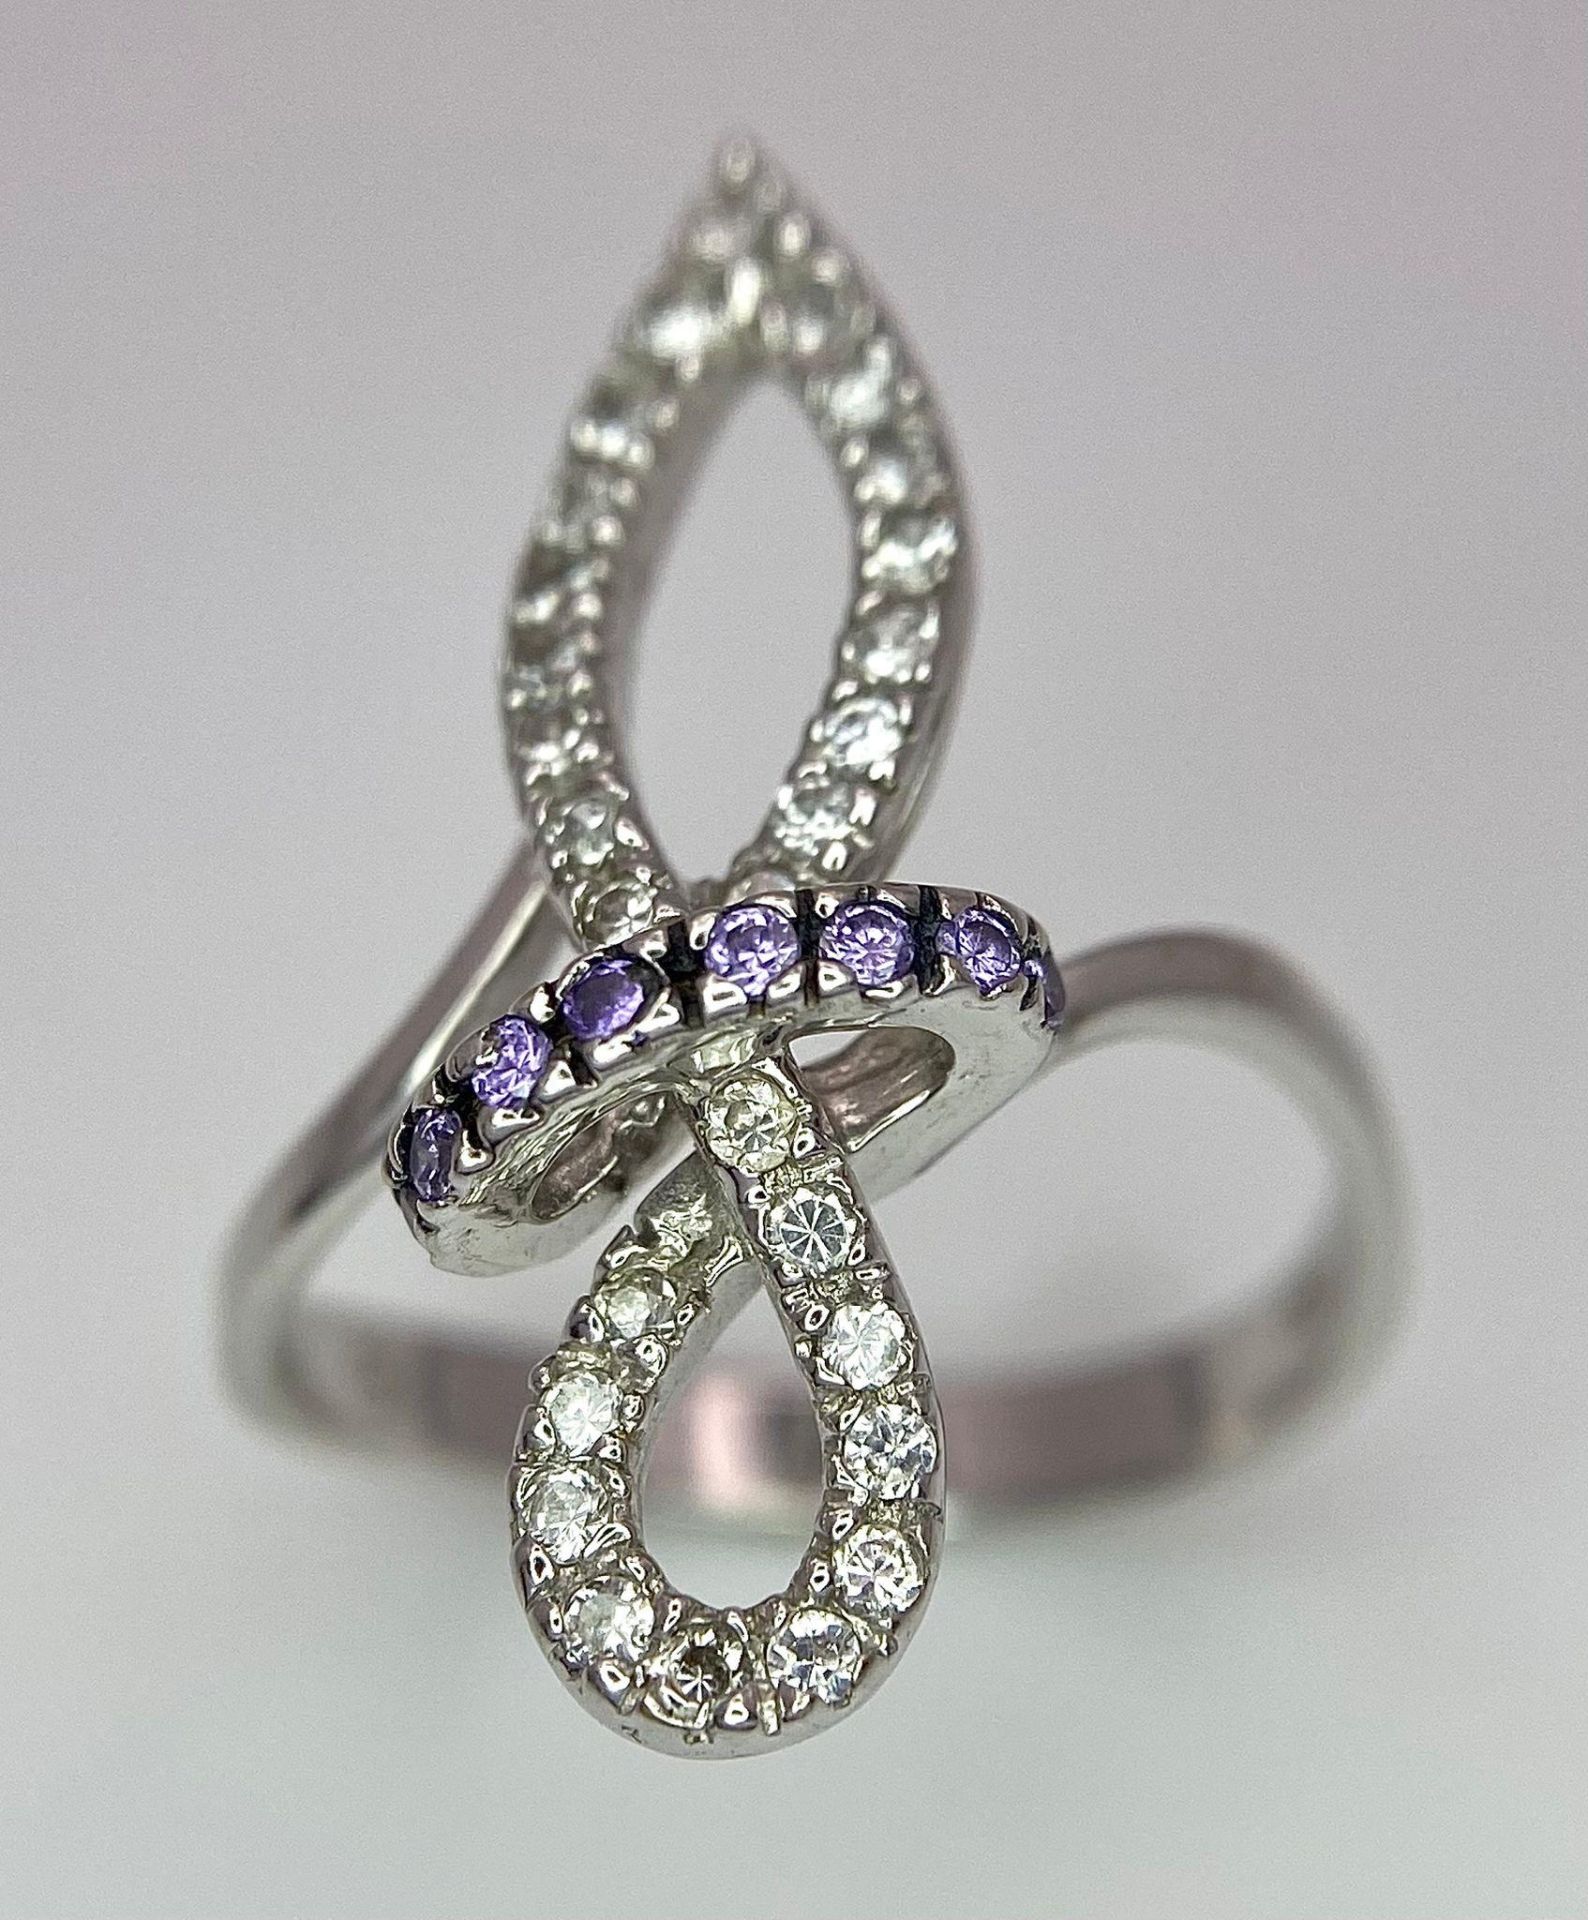 An 18K White Gold CZ Fancy Knot Ring. Size O. 3.9g weight. - Image 2 of 7